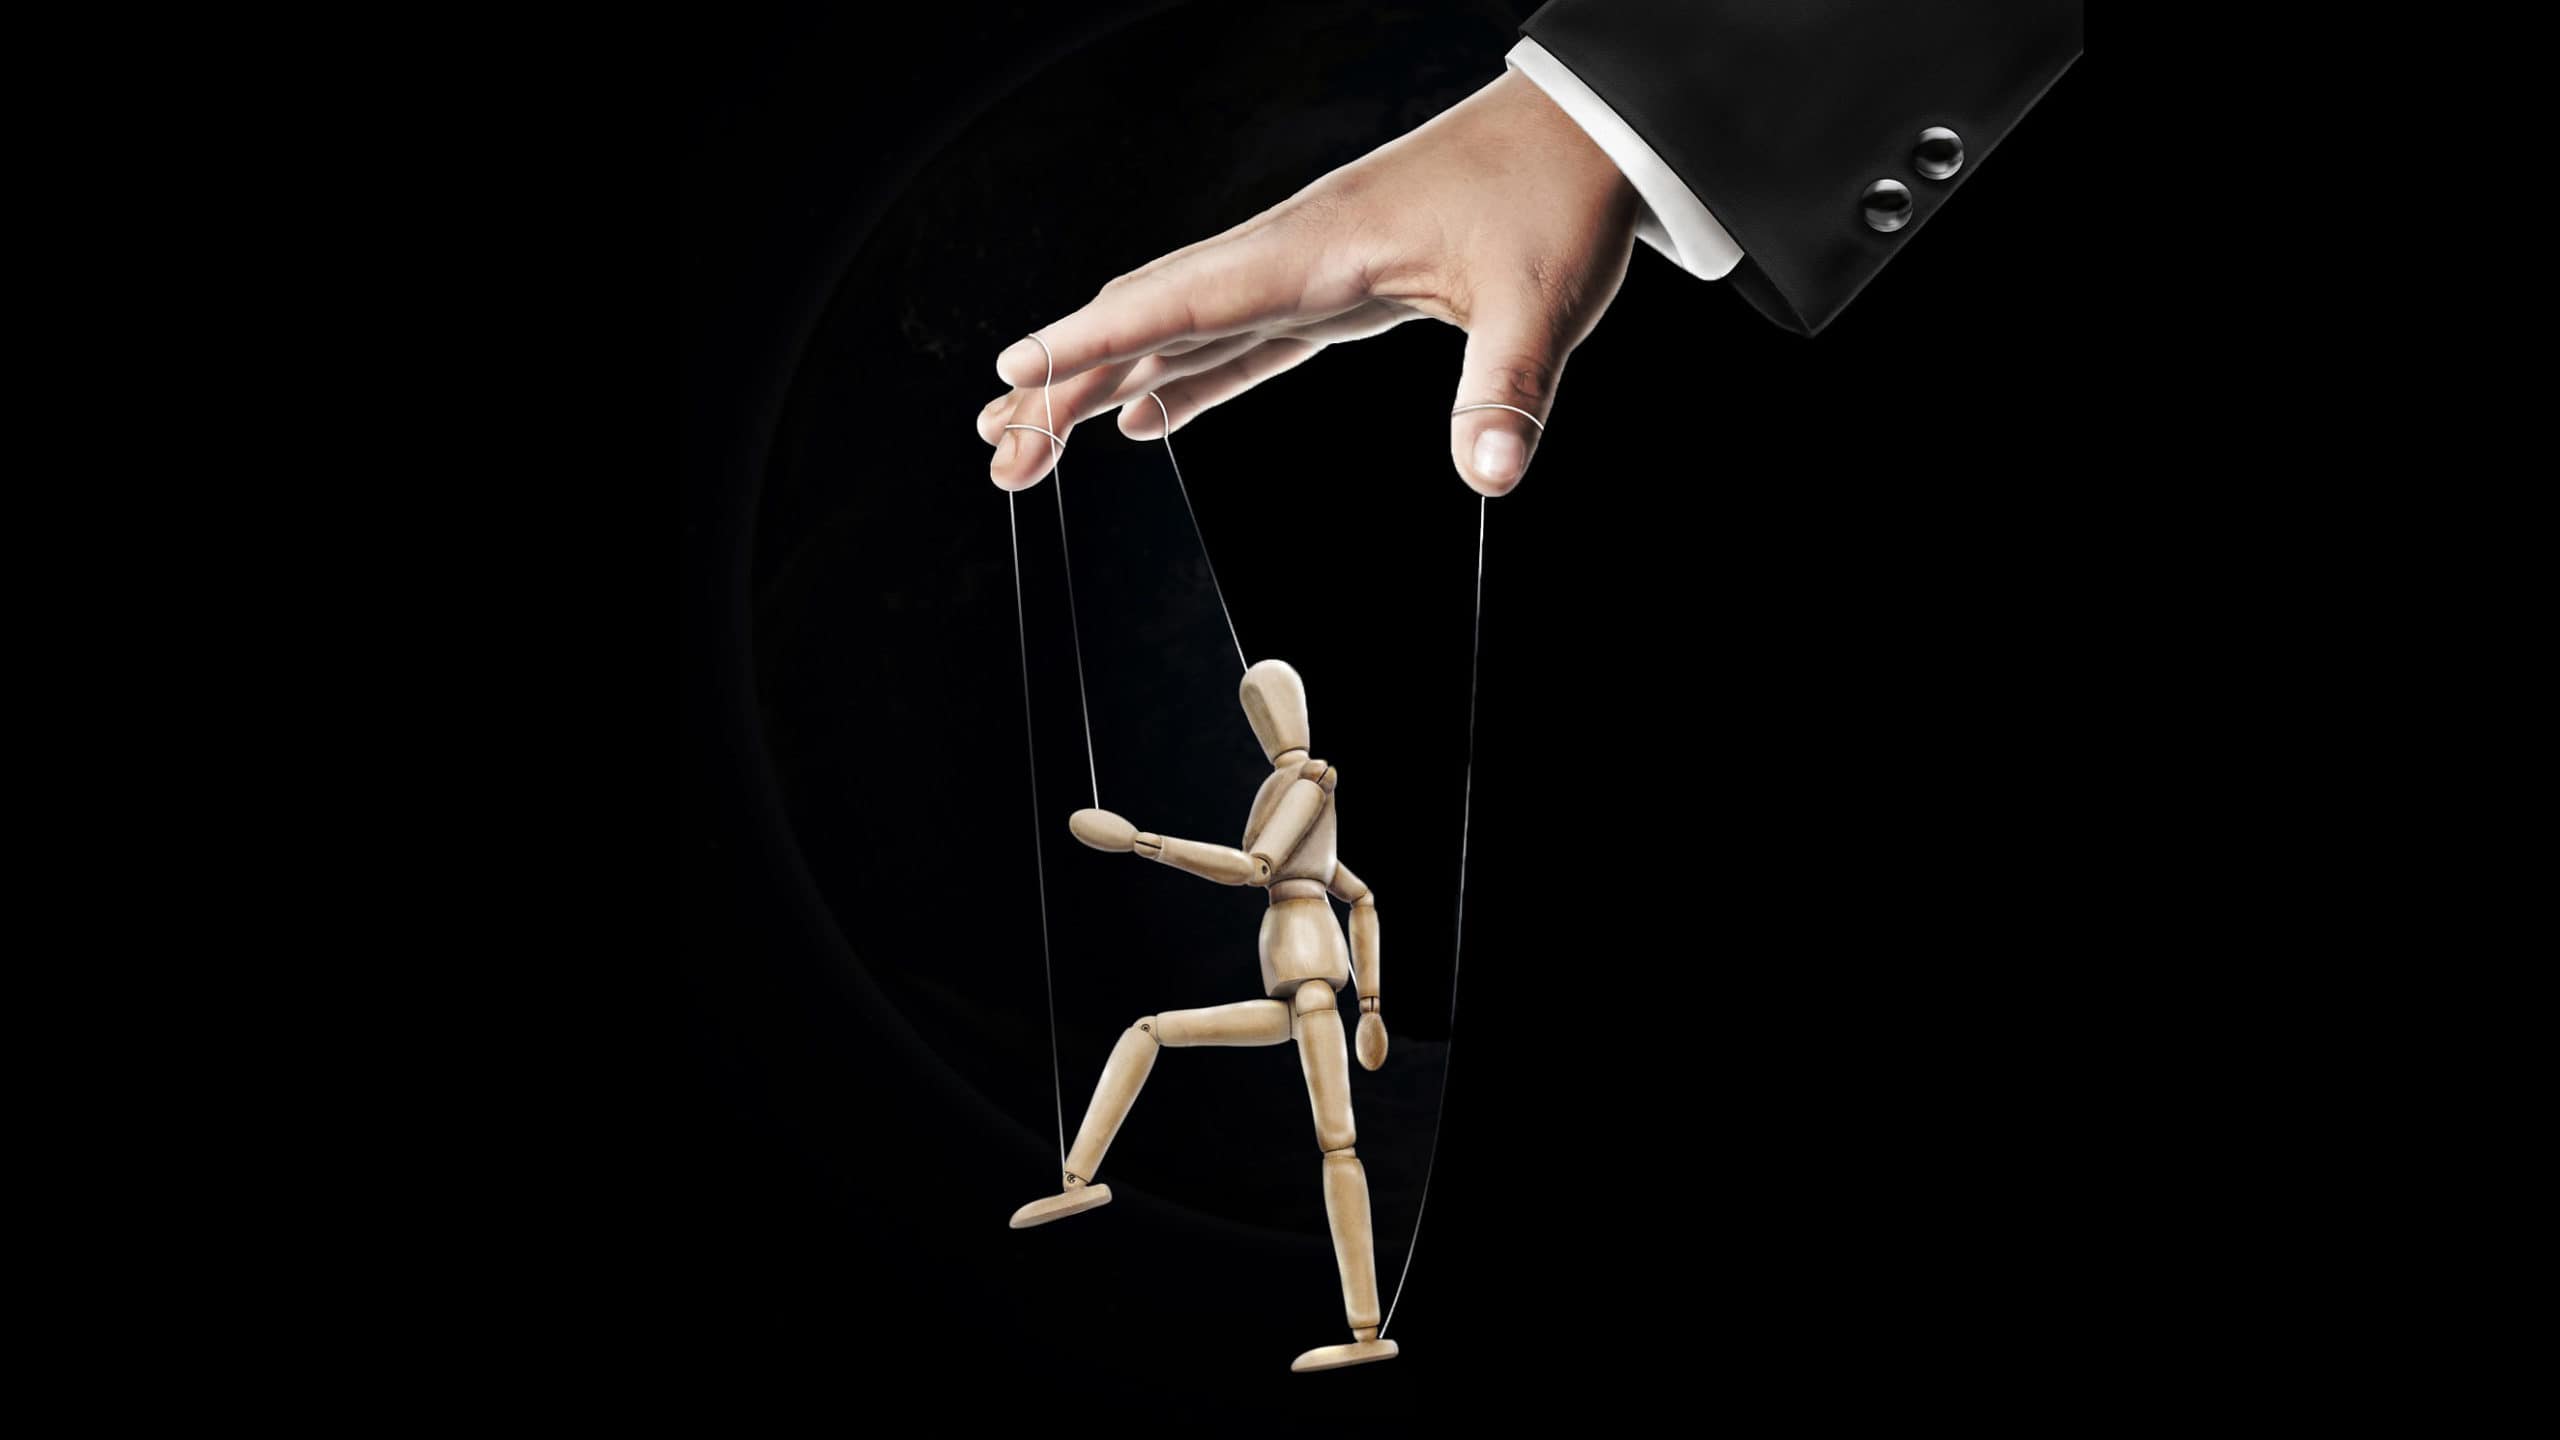 On the dynamics of “puppet master” bullying at work « Minding the